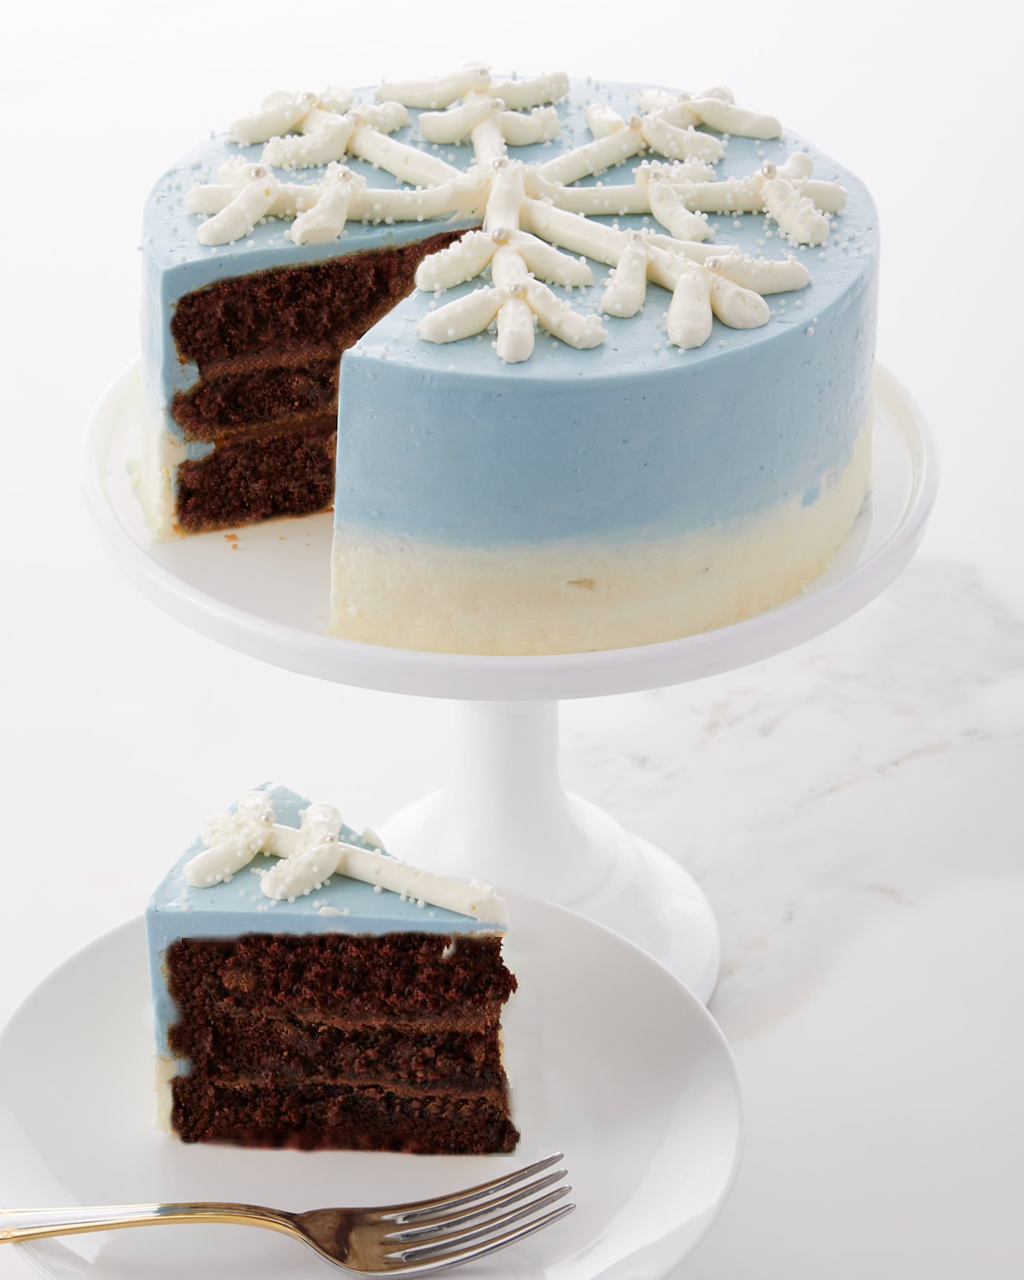 snowflake-hohliday-winter-cake-free-cake-delivery-dallas